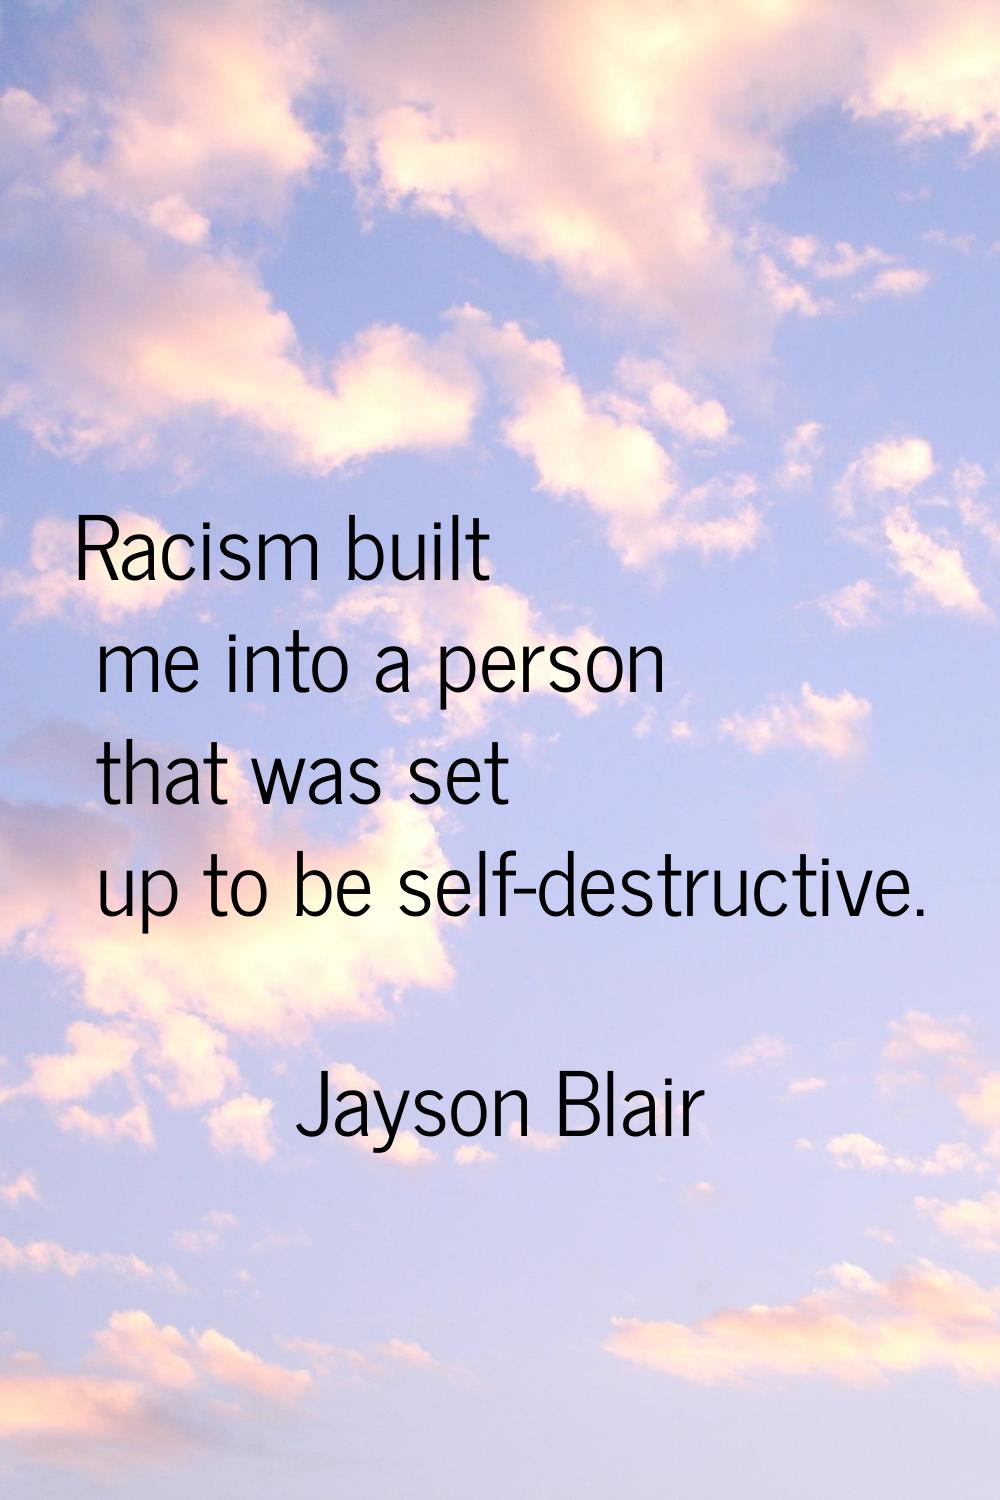 Racism built me into a person that was set up to be self-destructive.